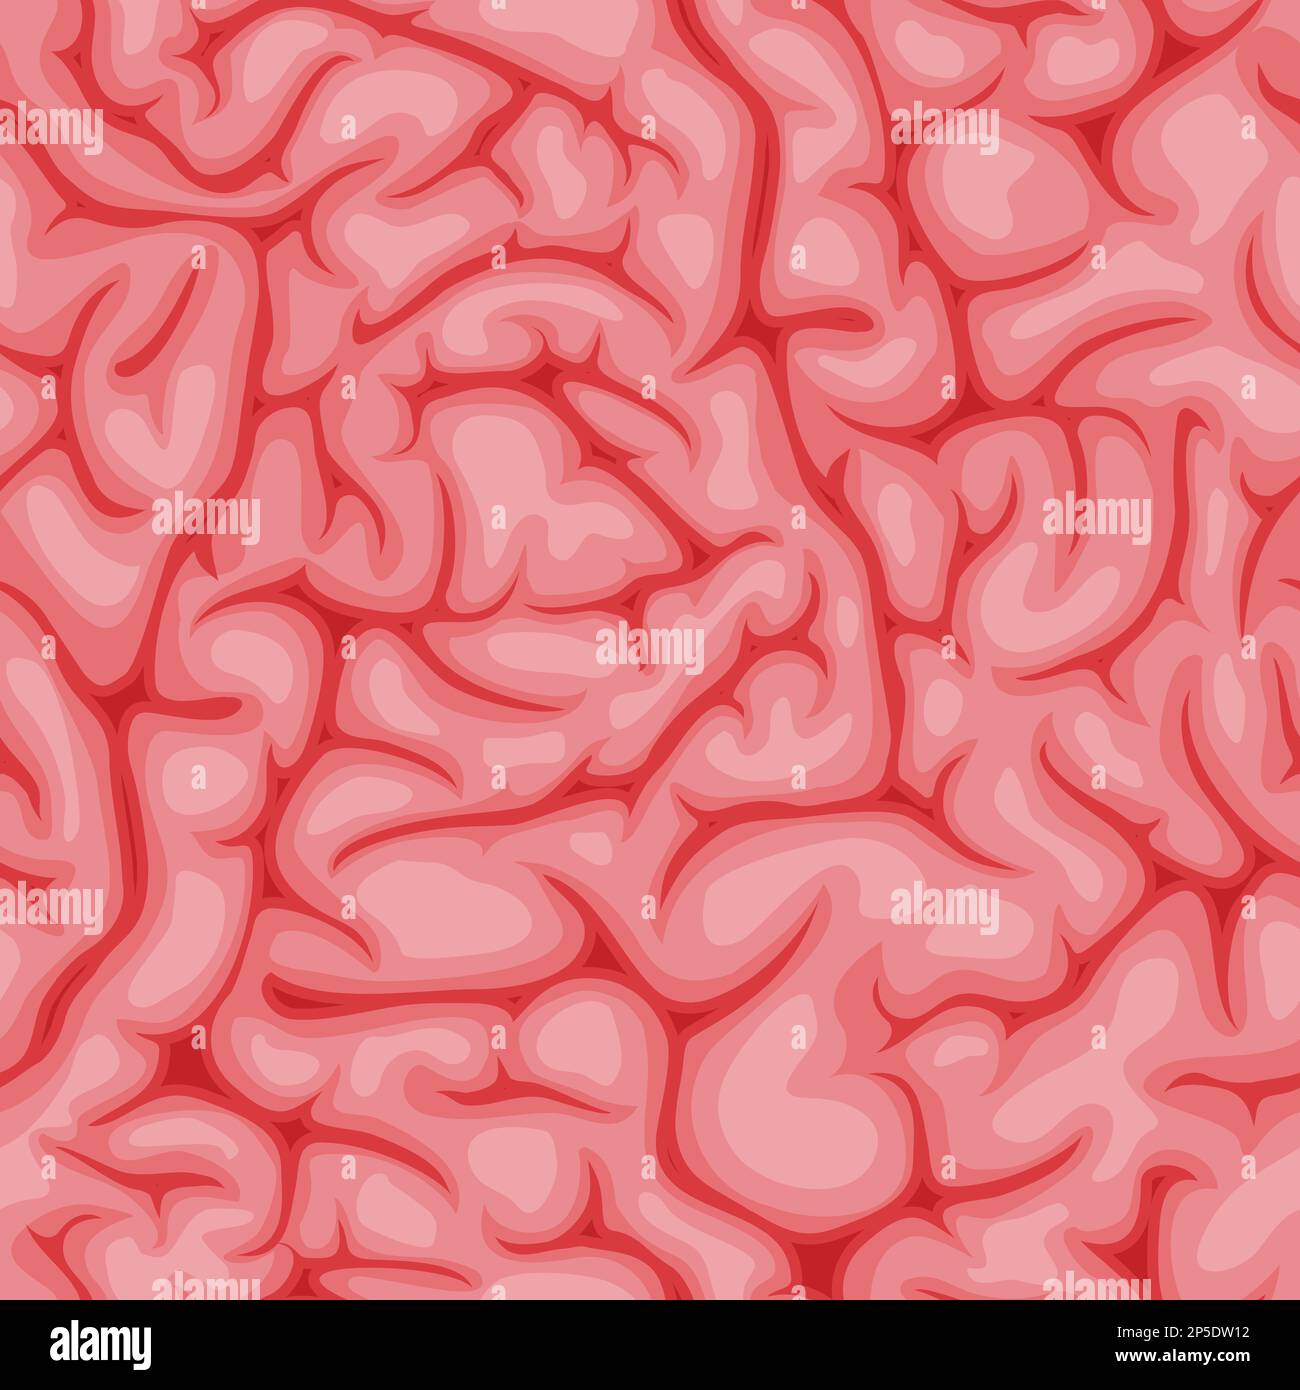 Brain seamless pattern with pink tissue texture. Vector background